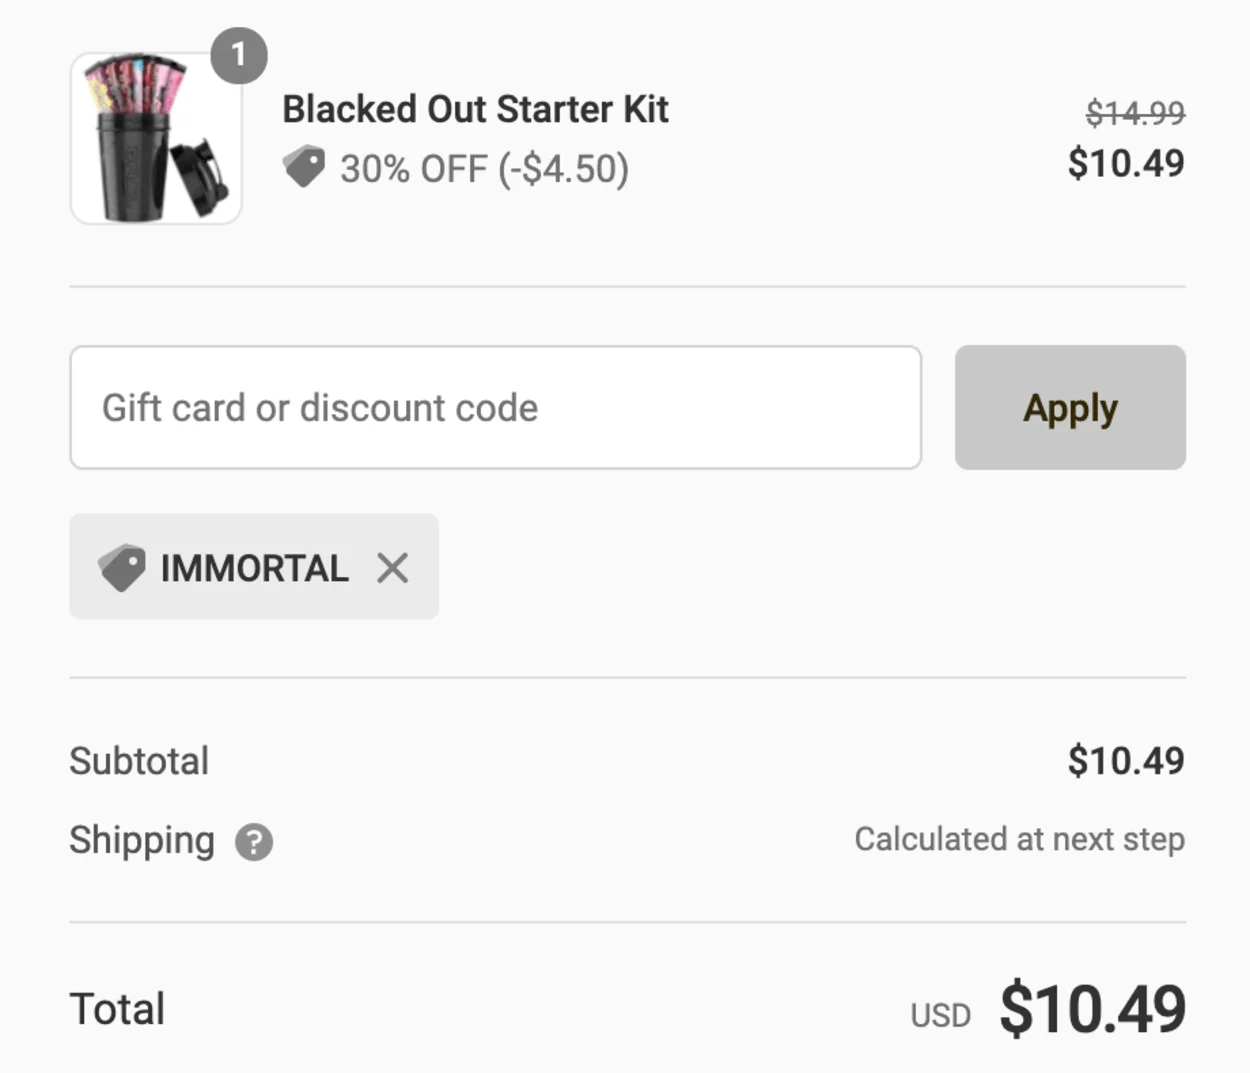 G Fuel checkout picture showing a discount applied to save $4.50.